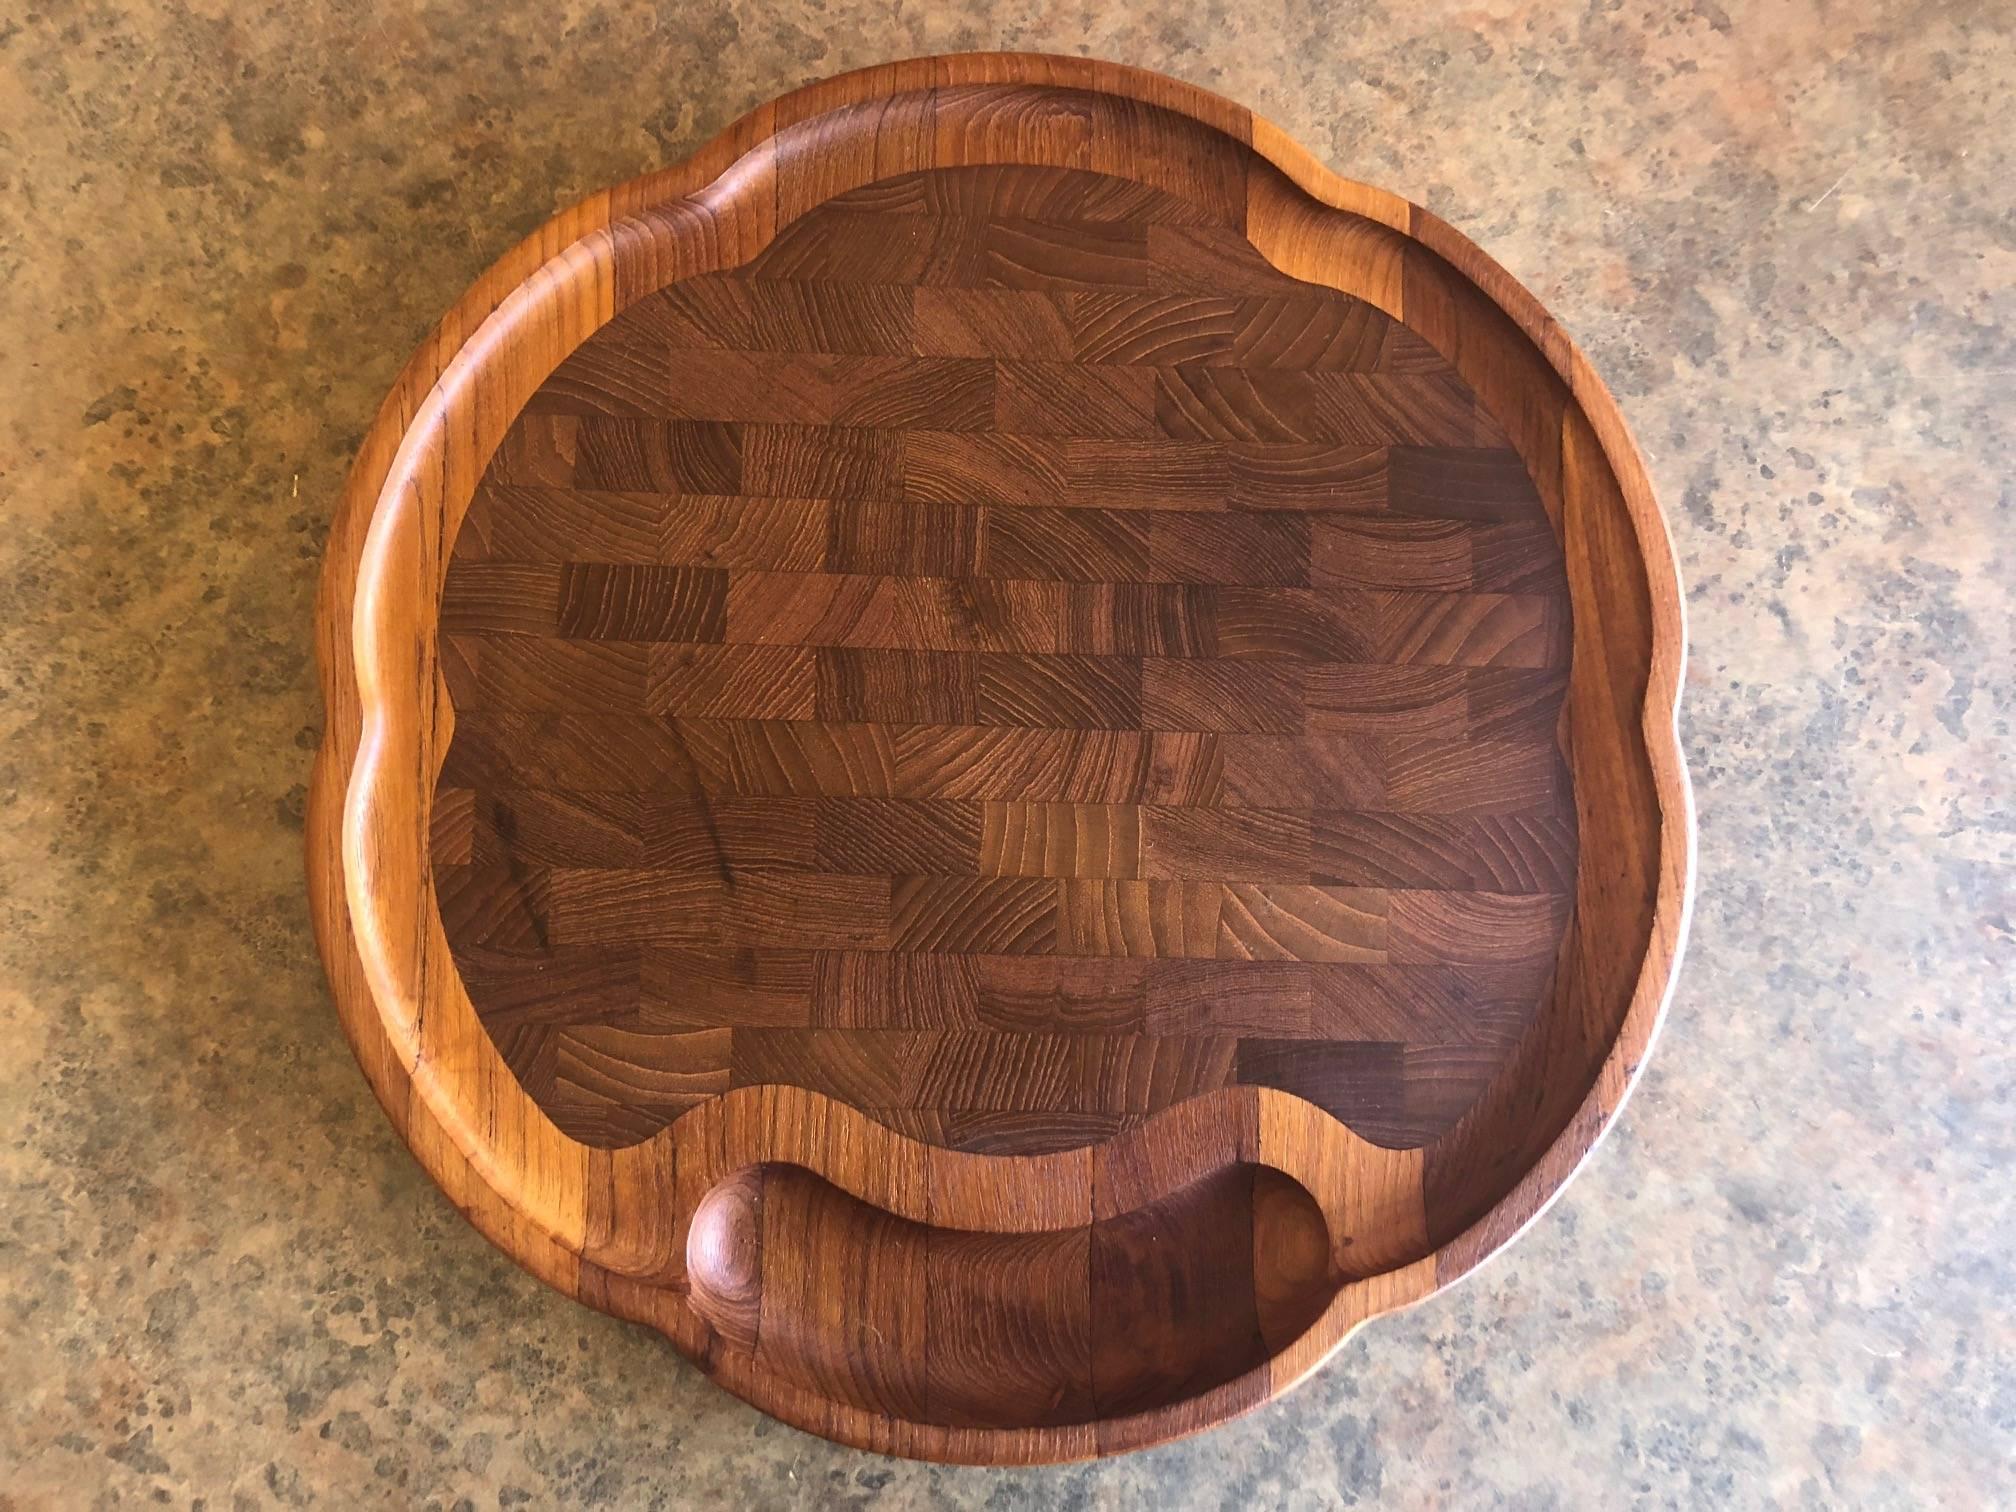 Rare, scalloped edge, Danish teak sloped cutting board by Richard Nissen, circa 1960s. The piece has a butcher block design and is 15.75